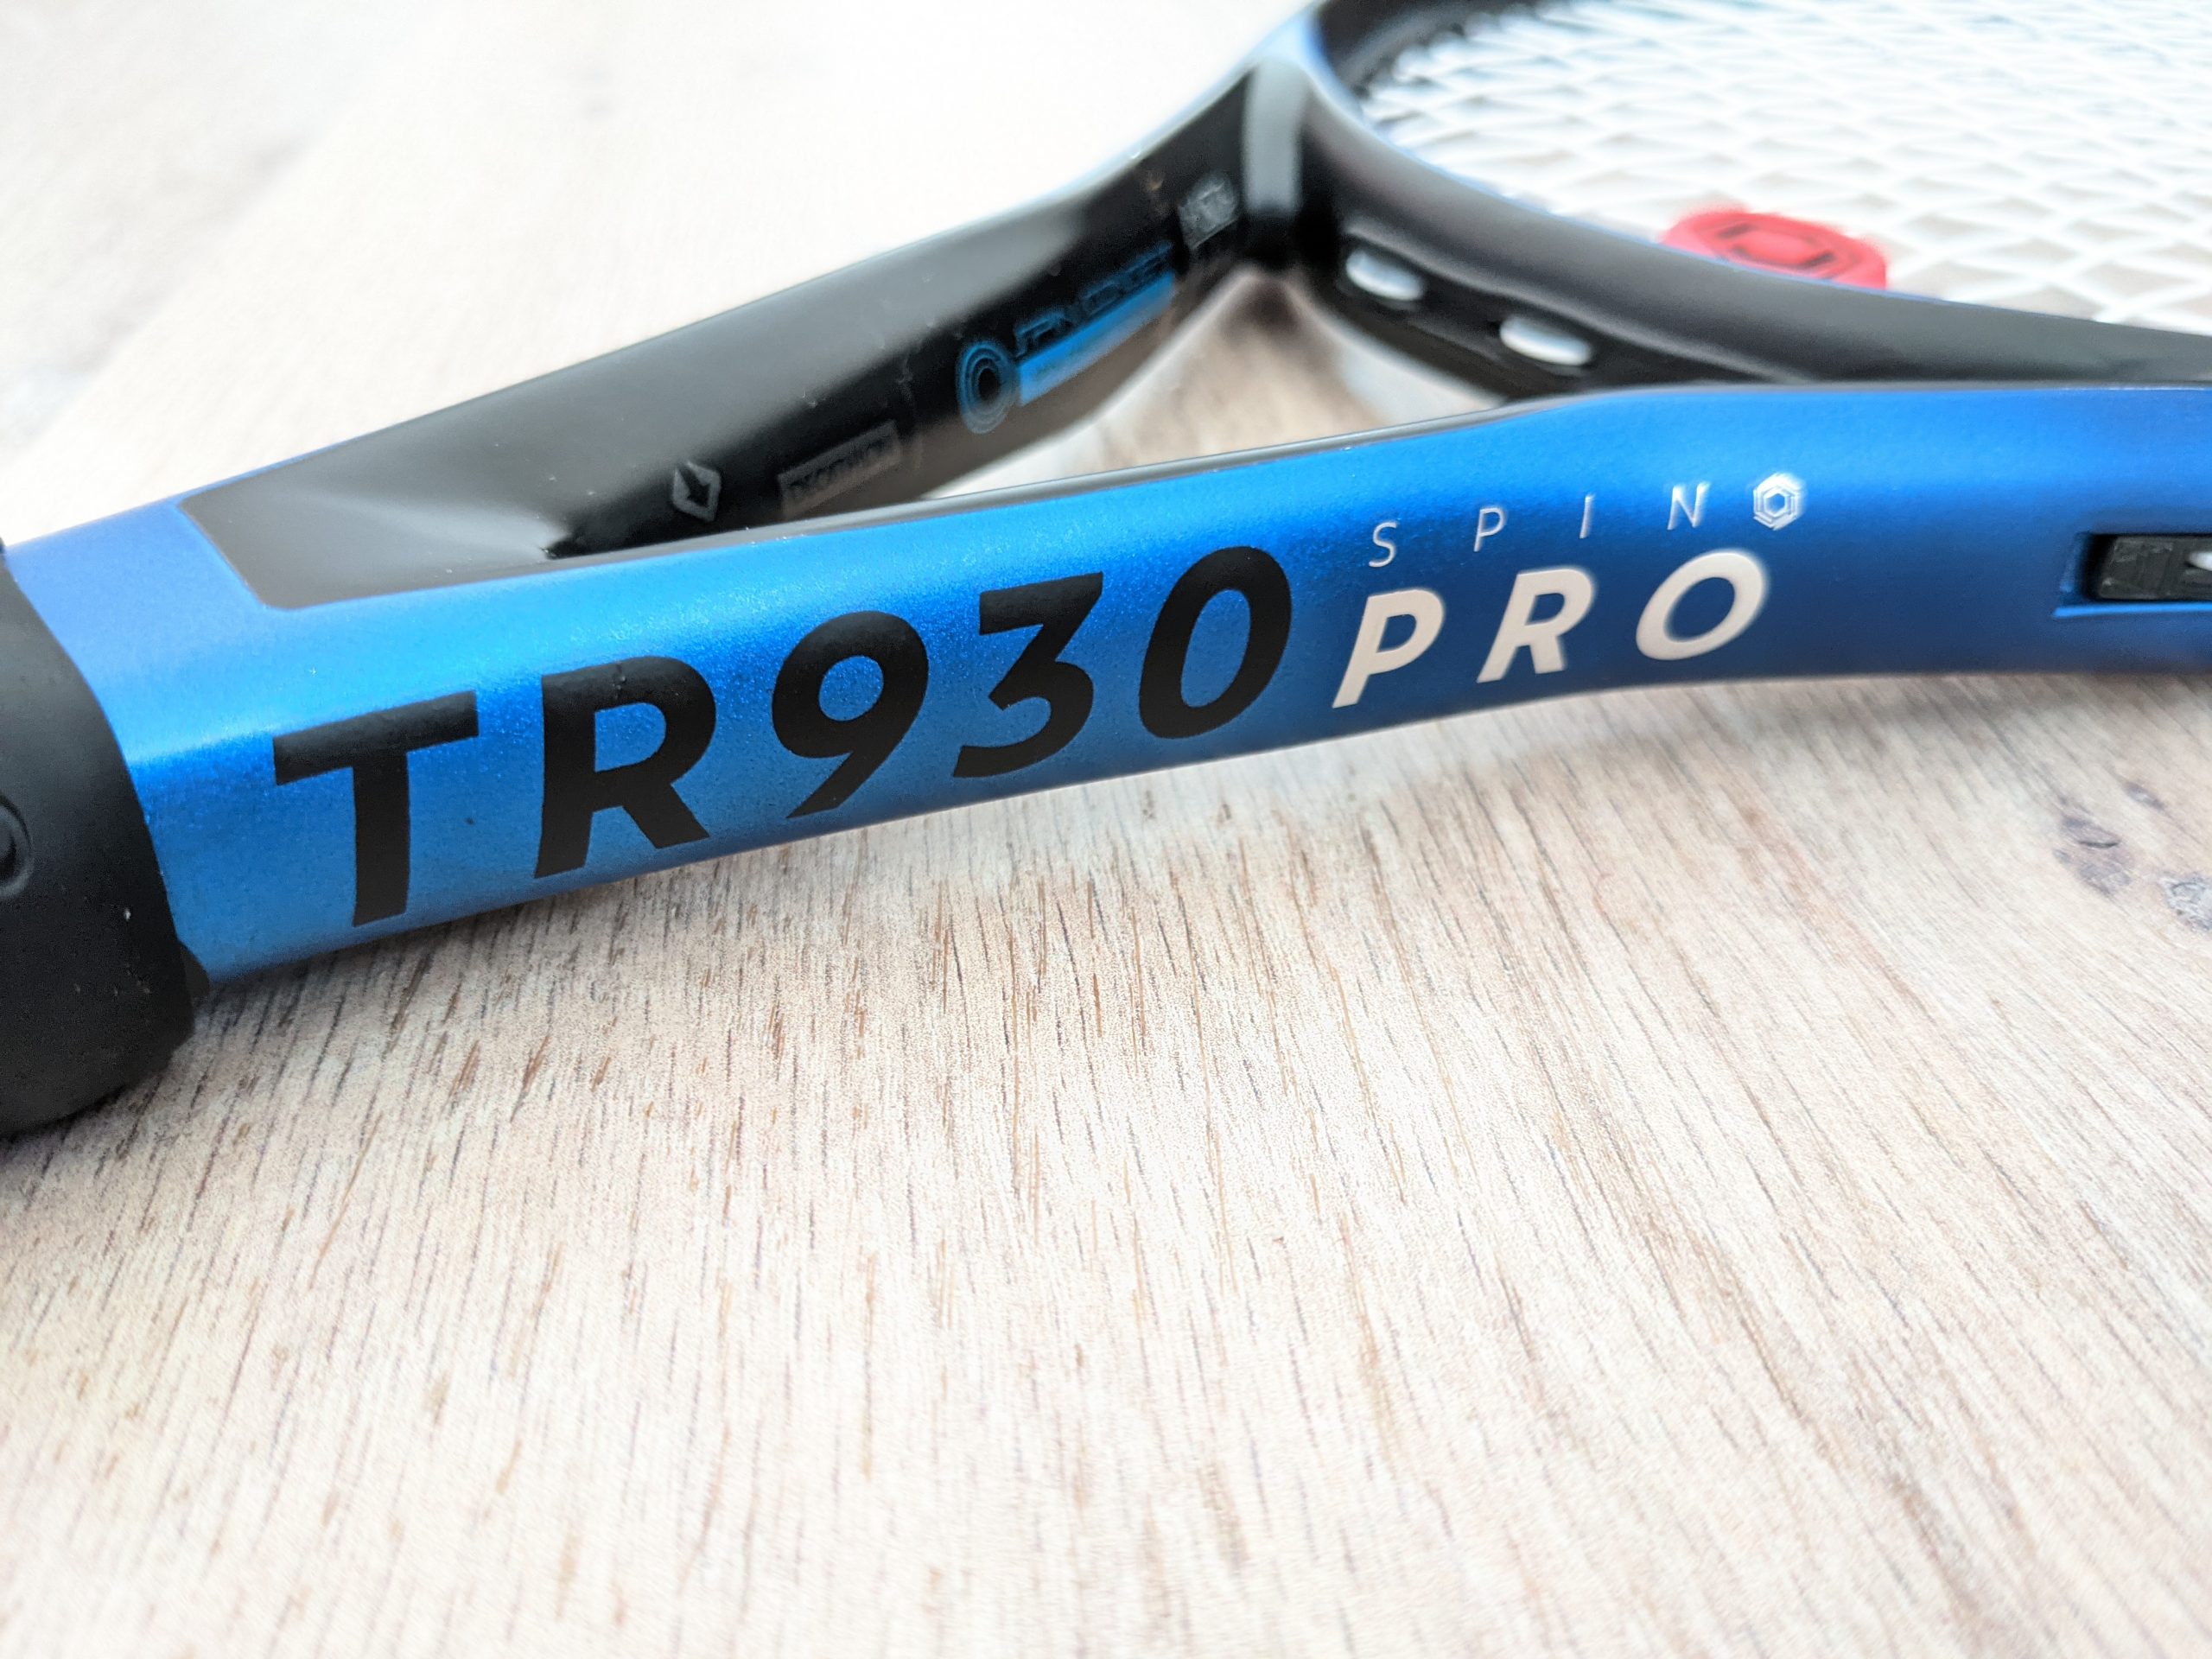 Artengo : how to install a grip or an overgrip on your tennis racket ? 